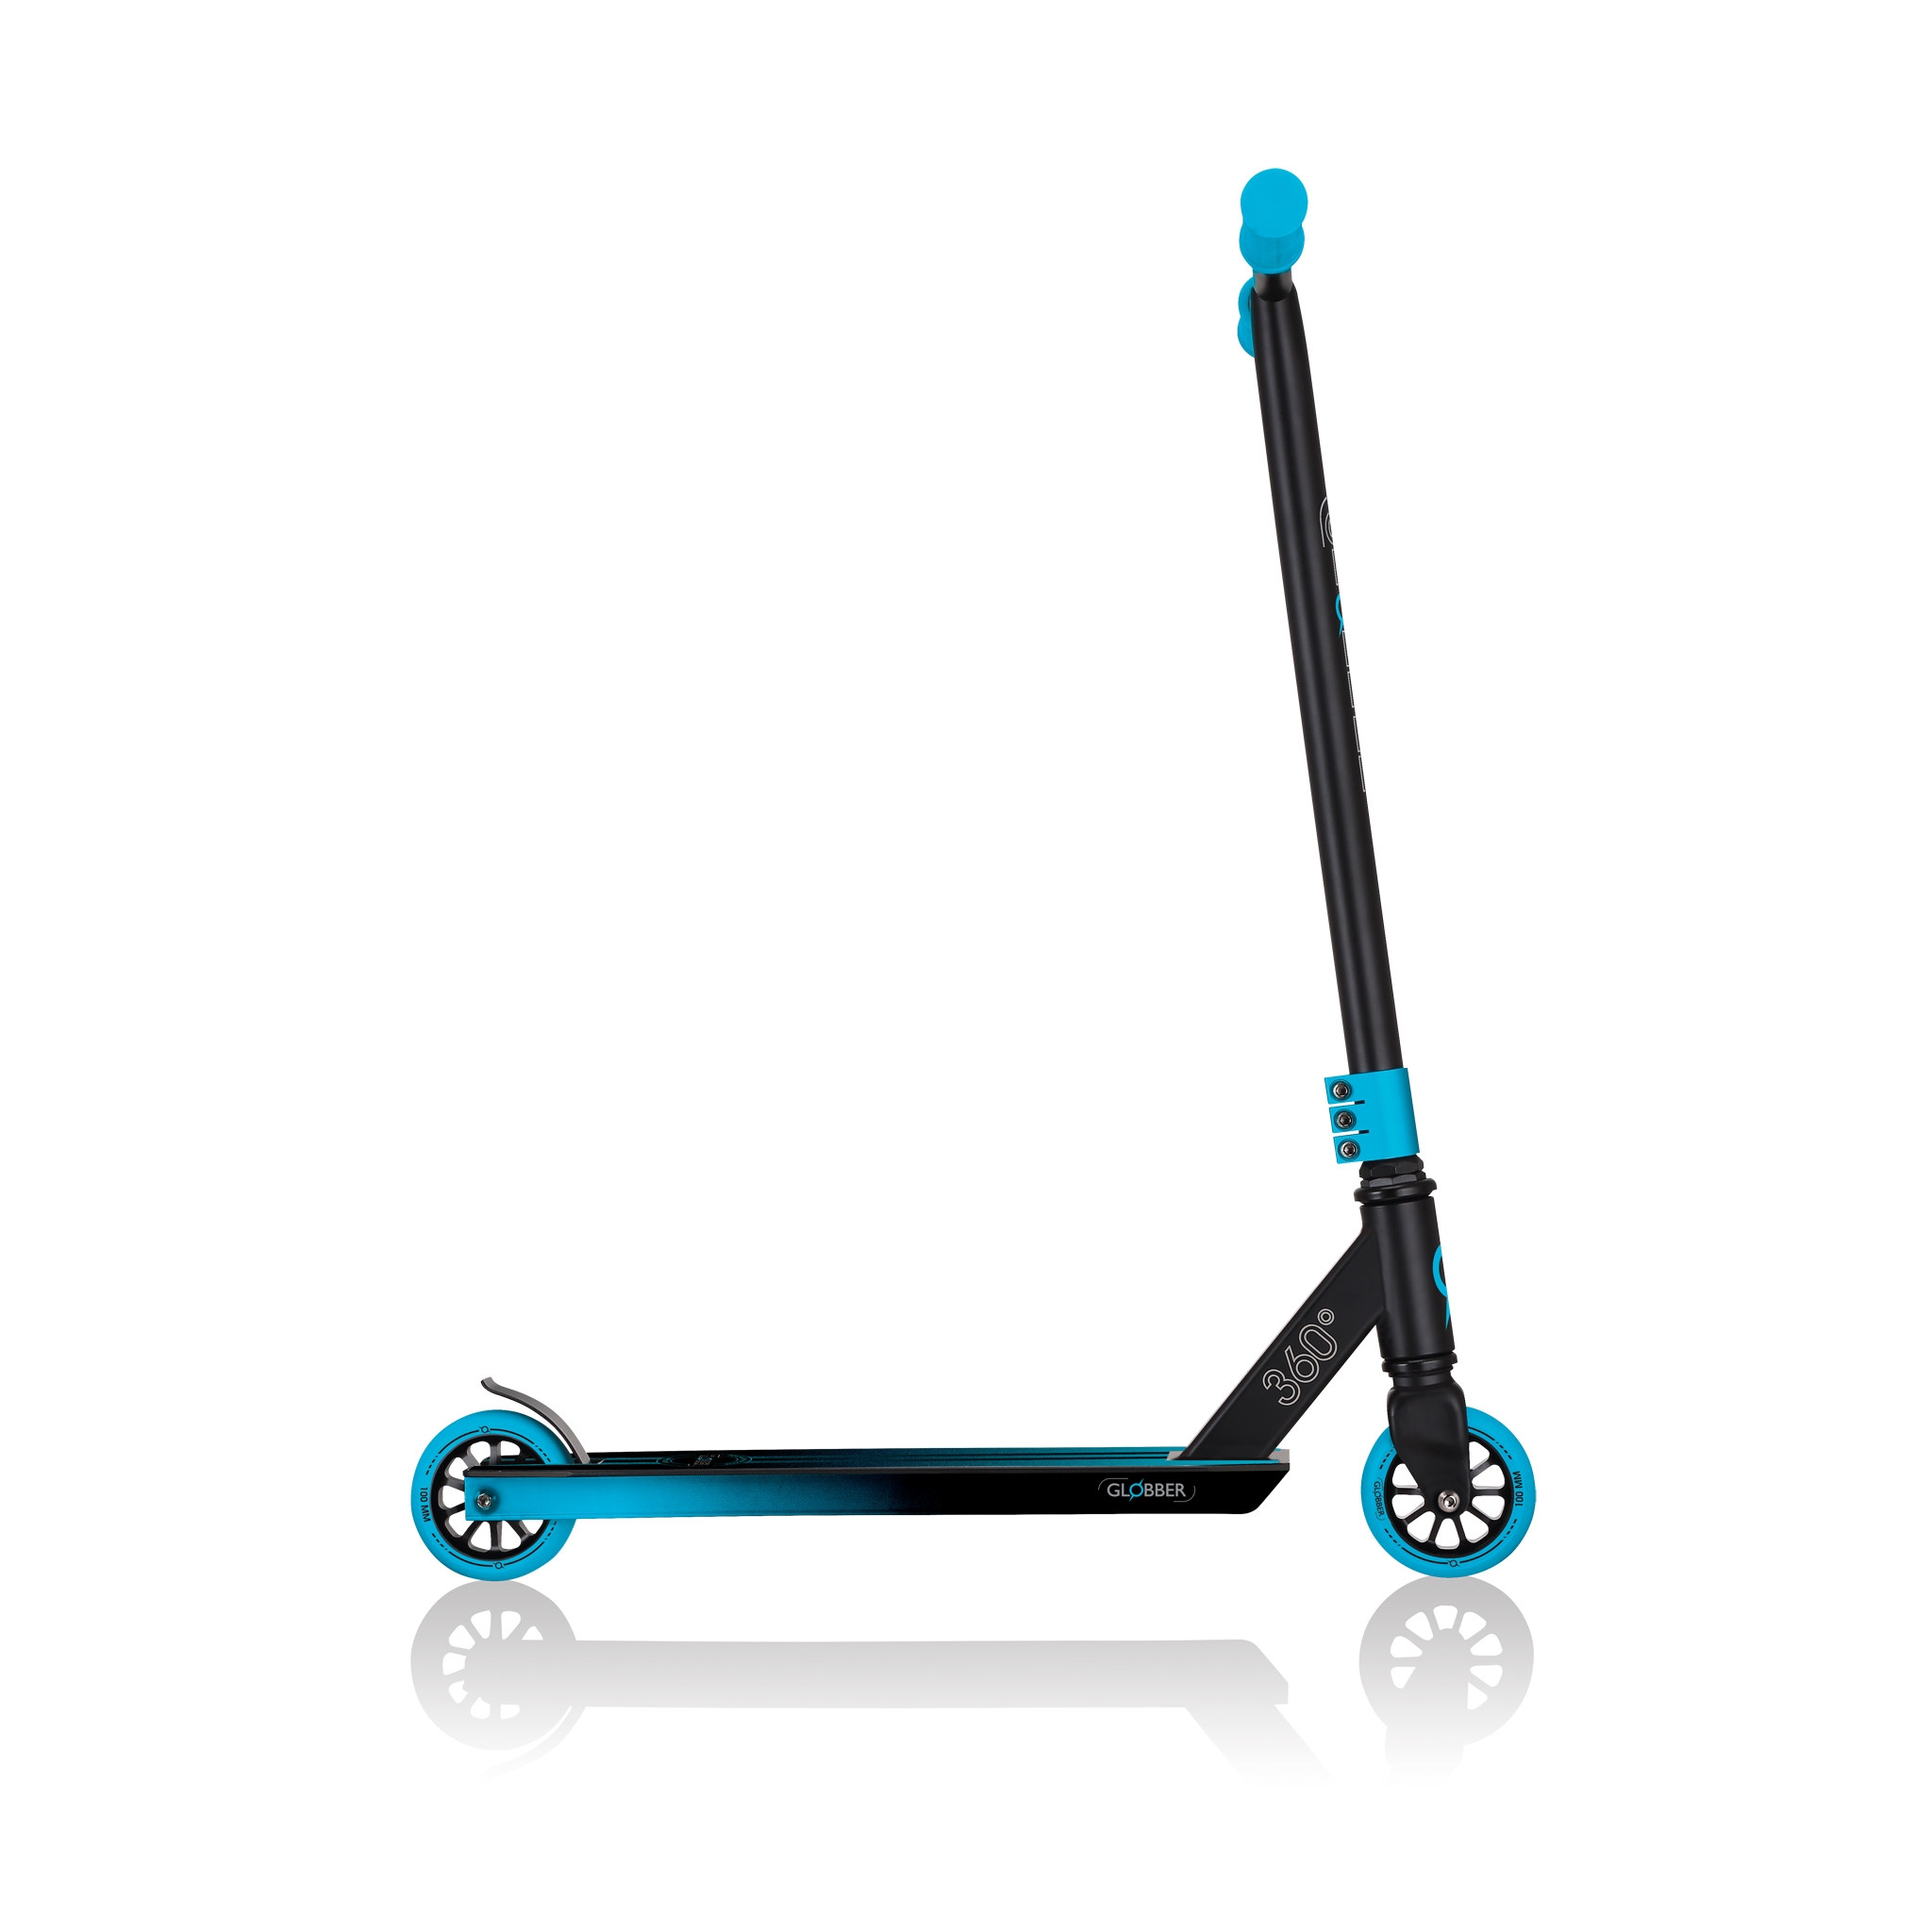 stunt-scooter-with-high-quality-wheels-Globber-GS360 4